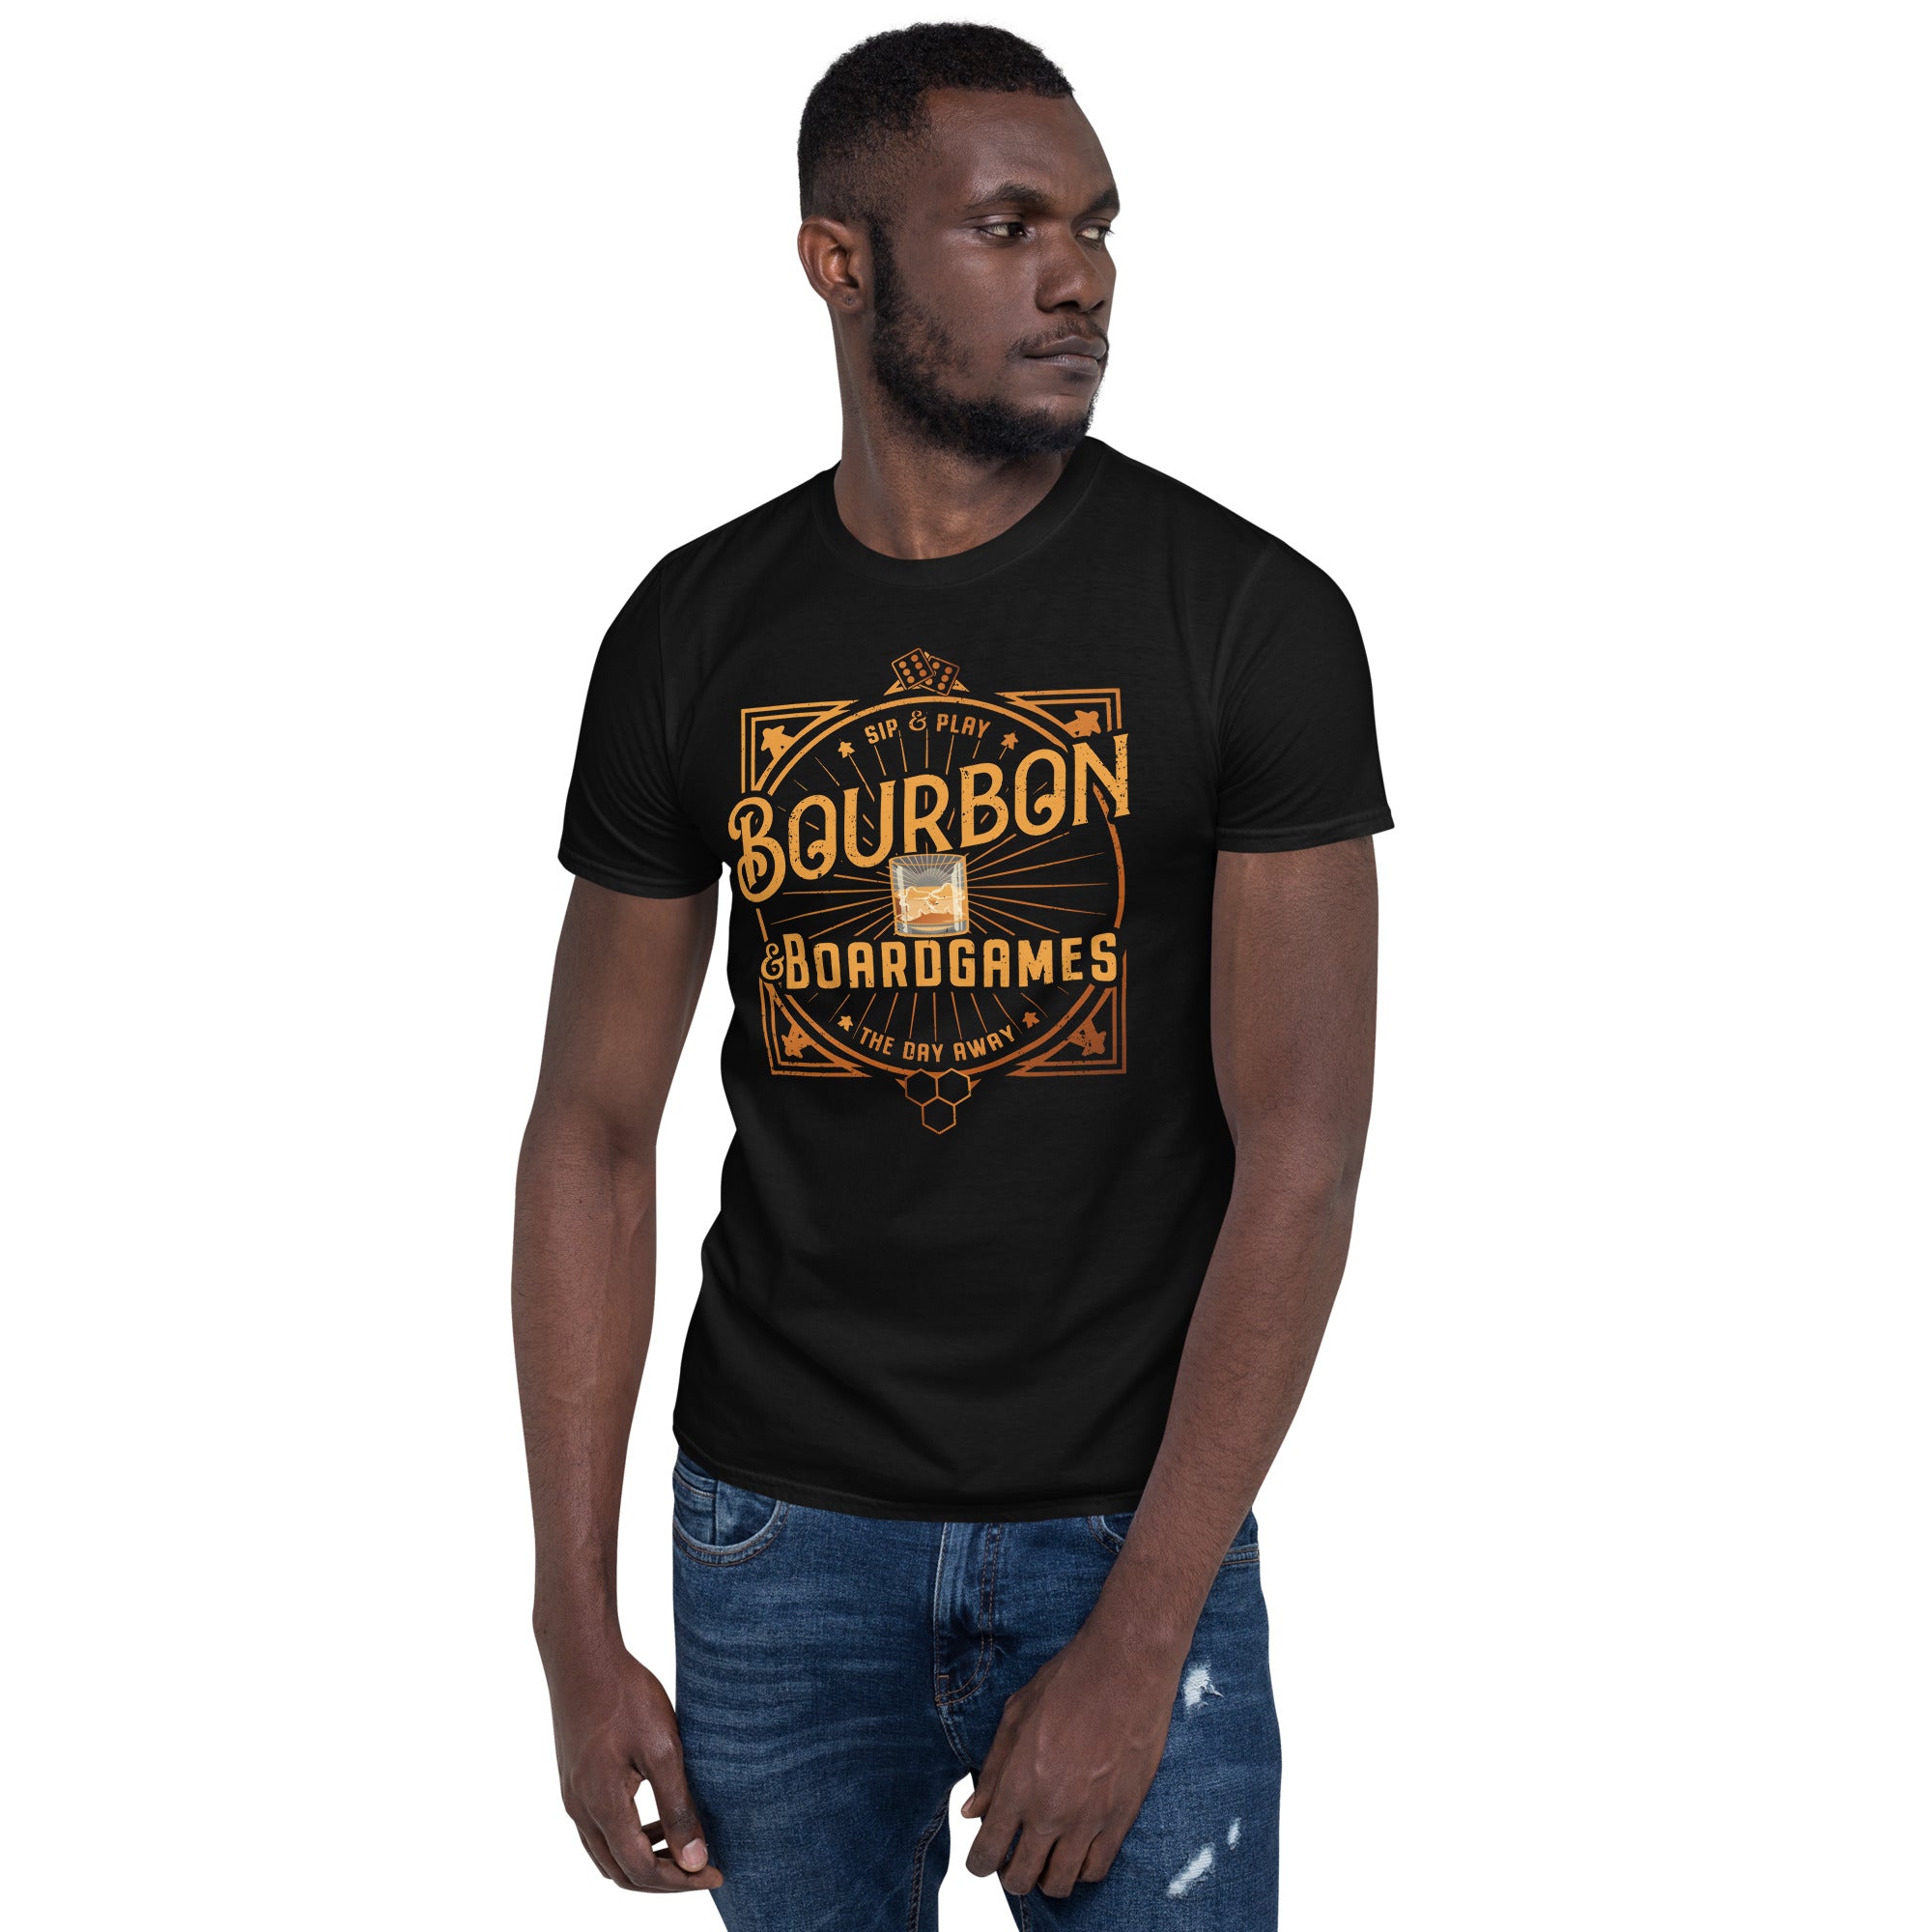 Model showing off our Bourbon and Boardgames design on black t-shirt